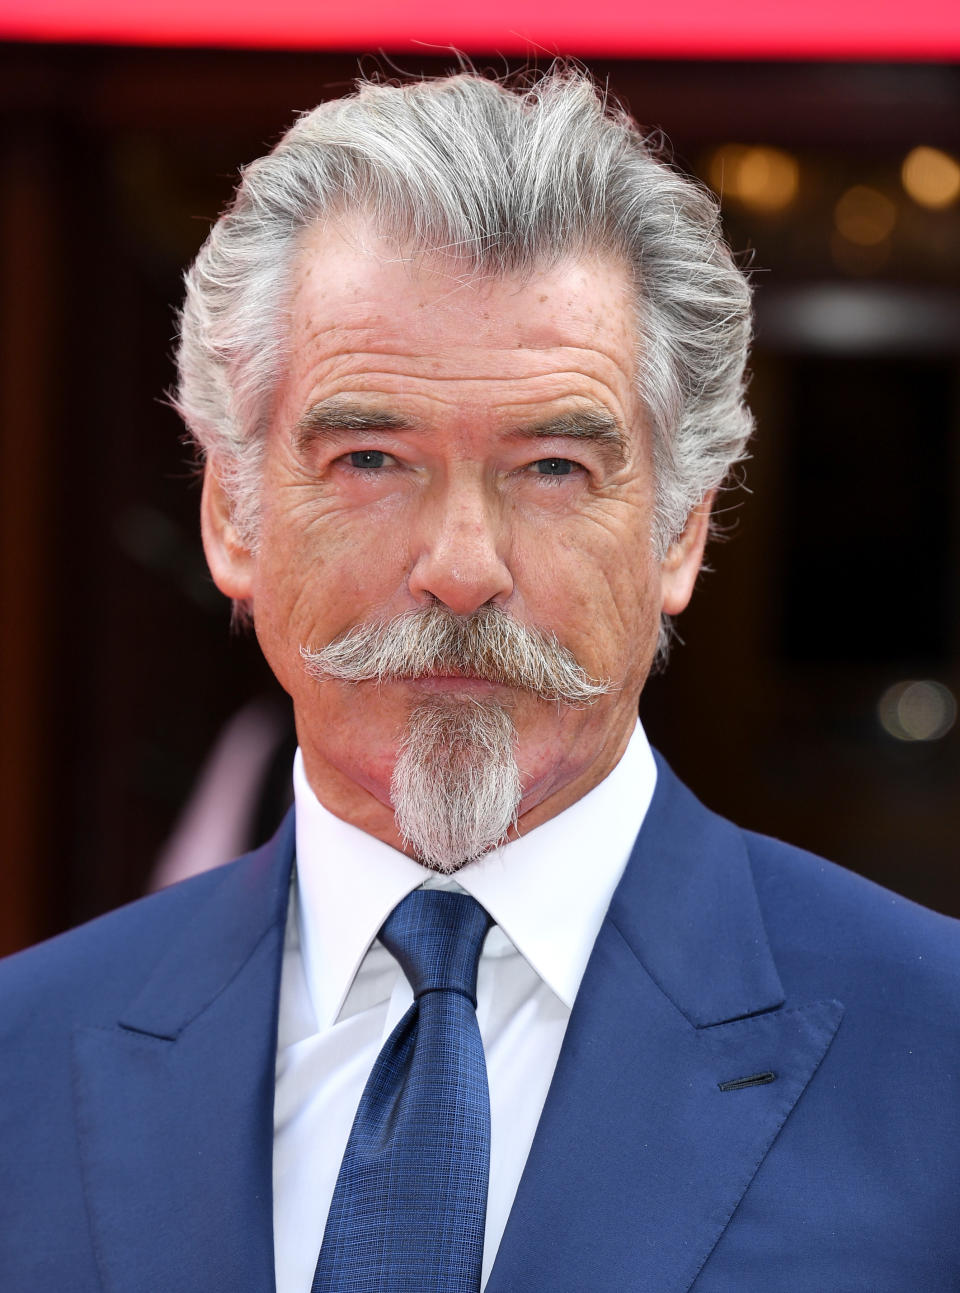 Pierce Brosnan attends the Prince's Trust And TK Maxx & Homesense Awards at London Palladium on March 11, 2020 in London, England